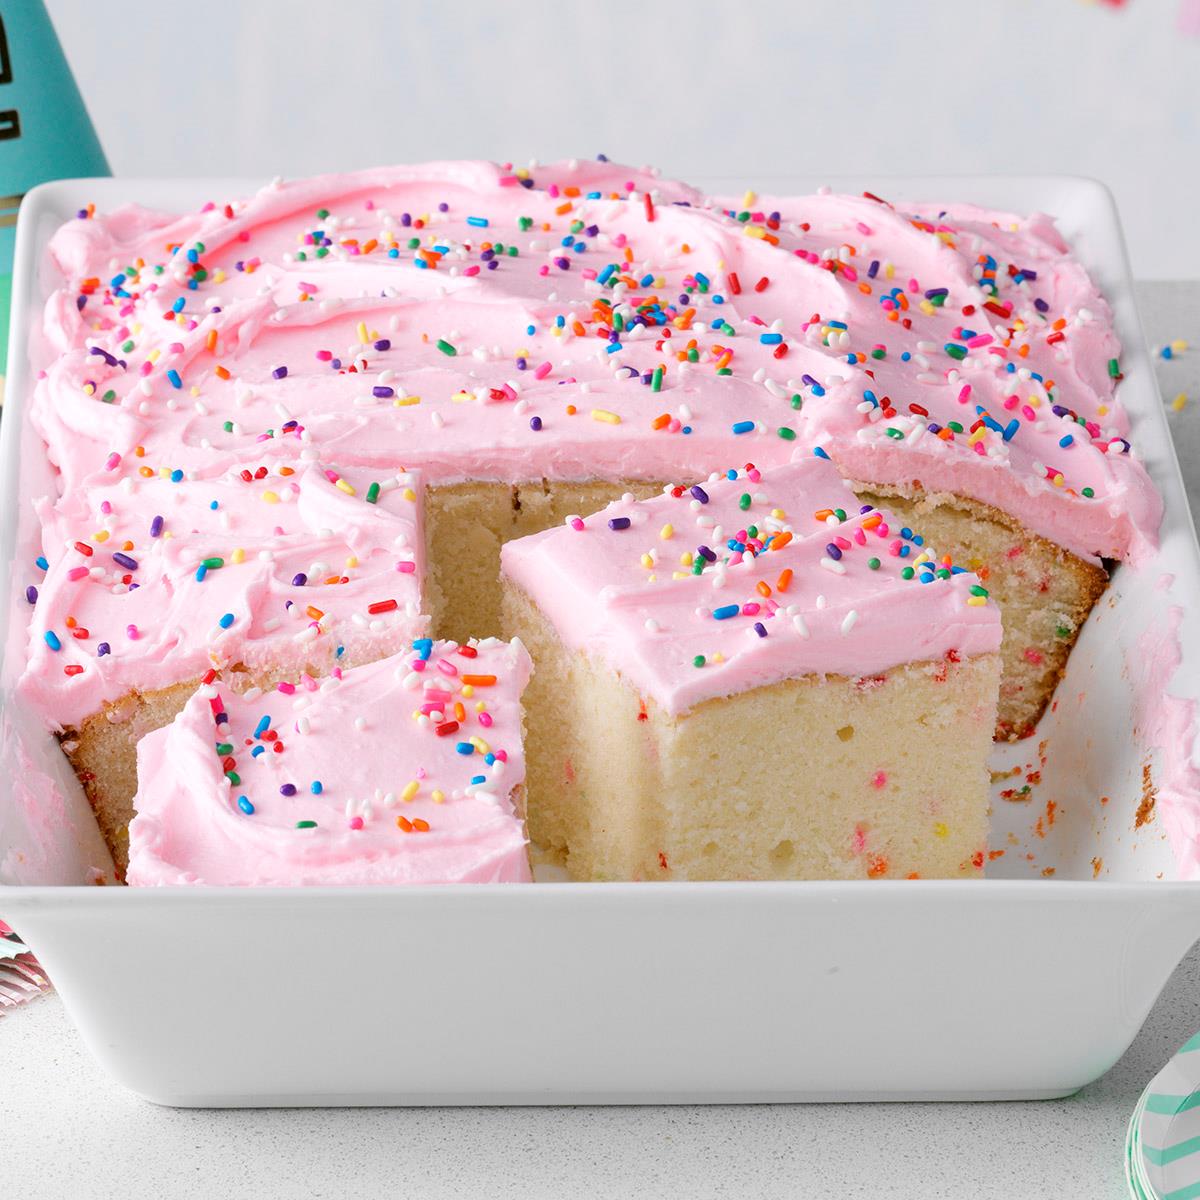 The Best Confetti Cake Mix According to Our Test Kitchen | Taste of Home